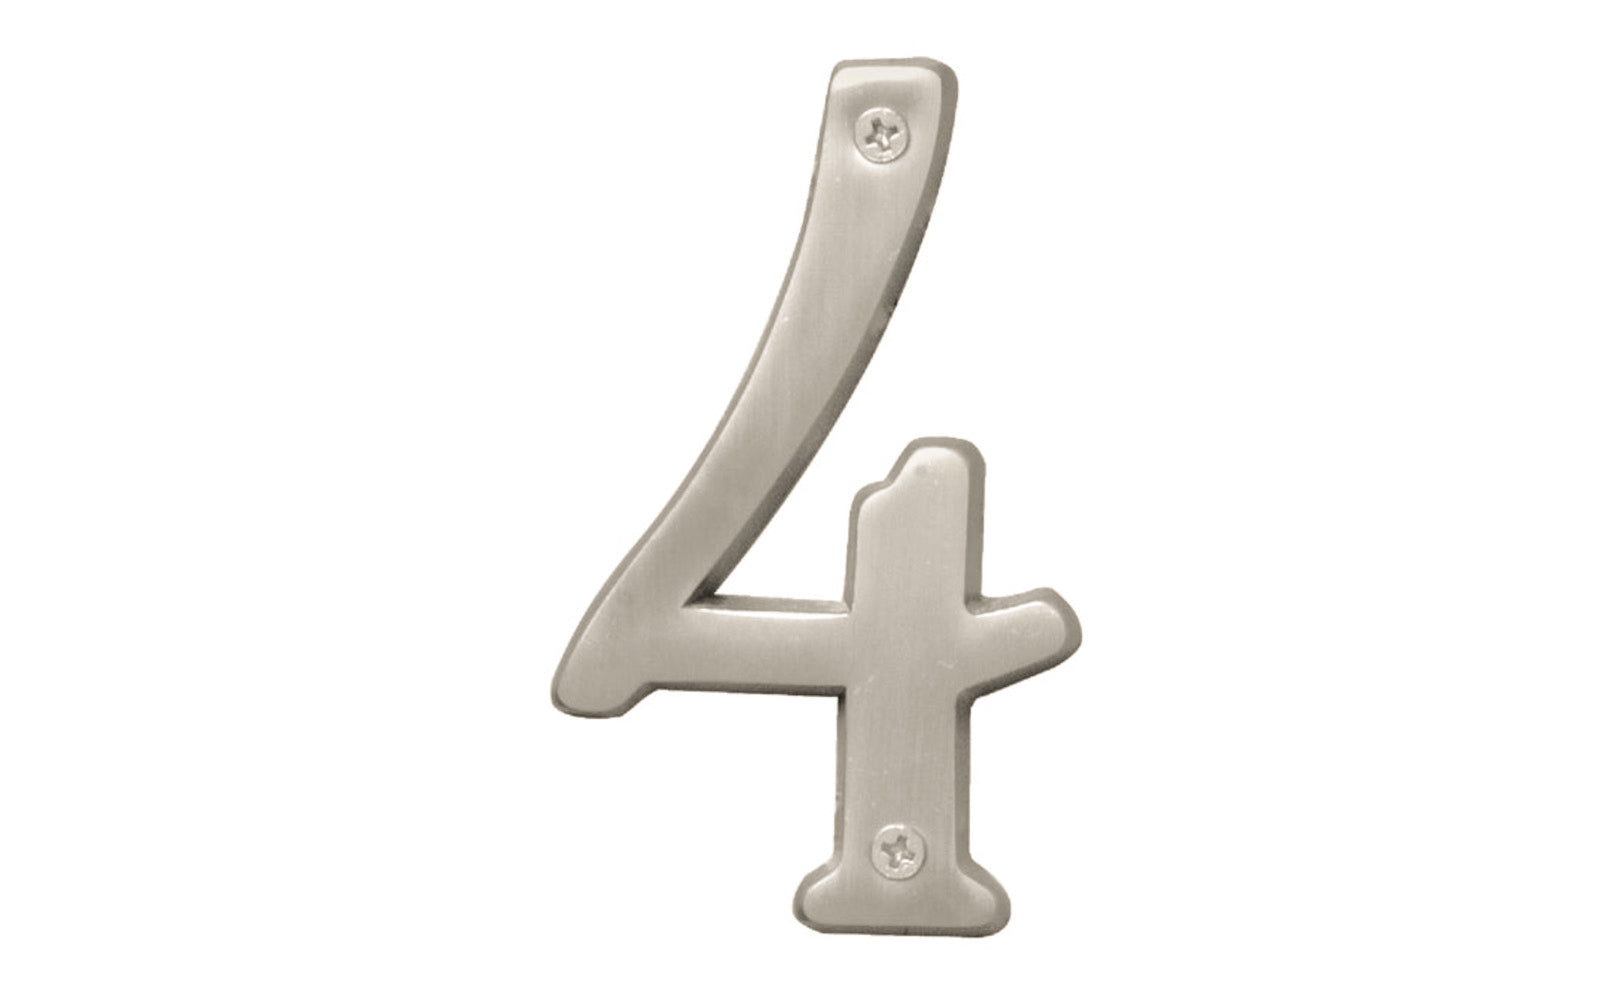 Number Four House Number in a 4" size. Satin nickel finish. Includes two phillips flat head screws. #4 house number. Hy-Ko Model BR-43SN/4.  Hardware house numbers for outdoors. Includes screws. 029069309343. #4 Satin Nickel House Number - 4" Size